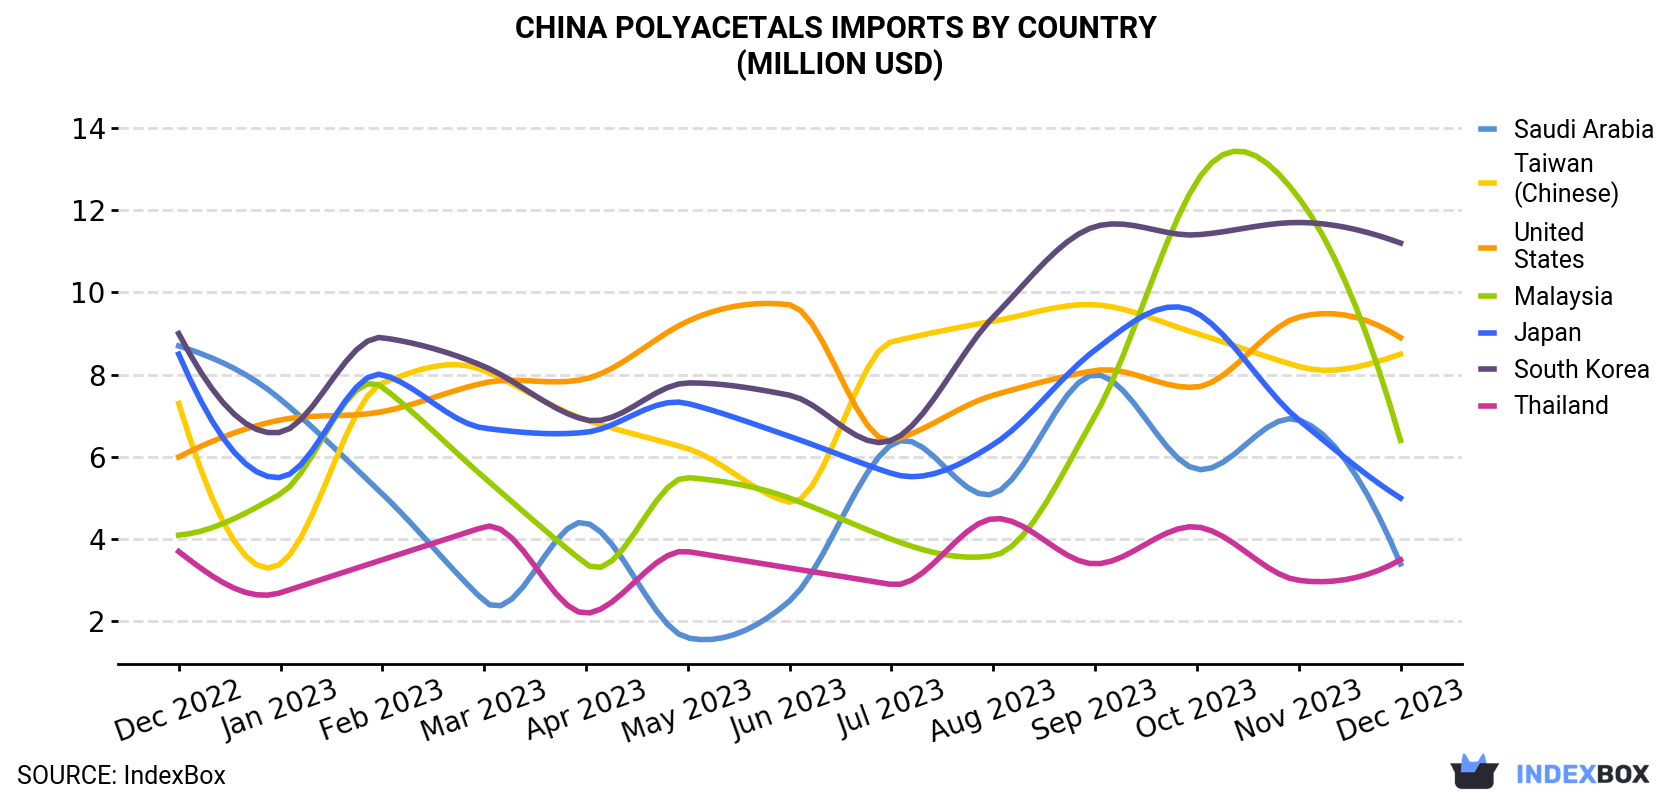 China Polyacetals Imports By Country (Million USD)